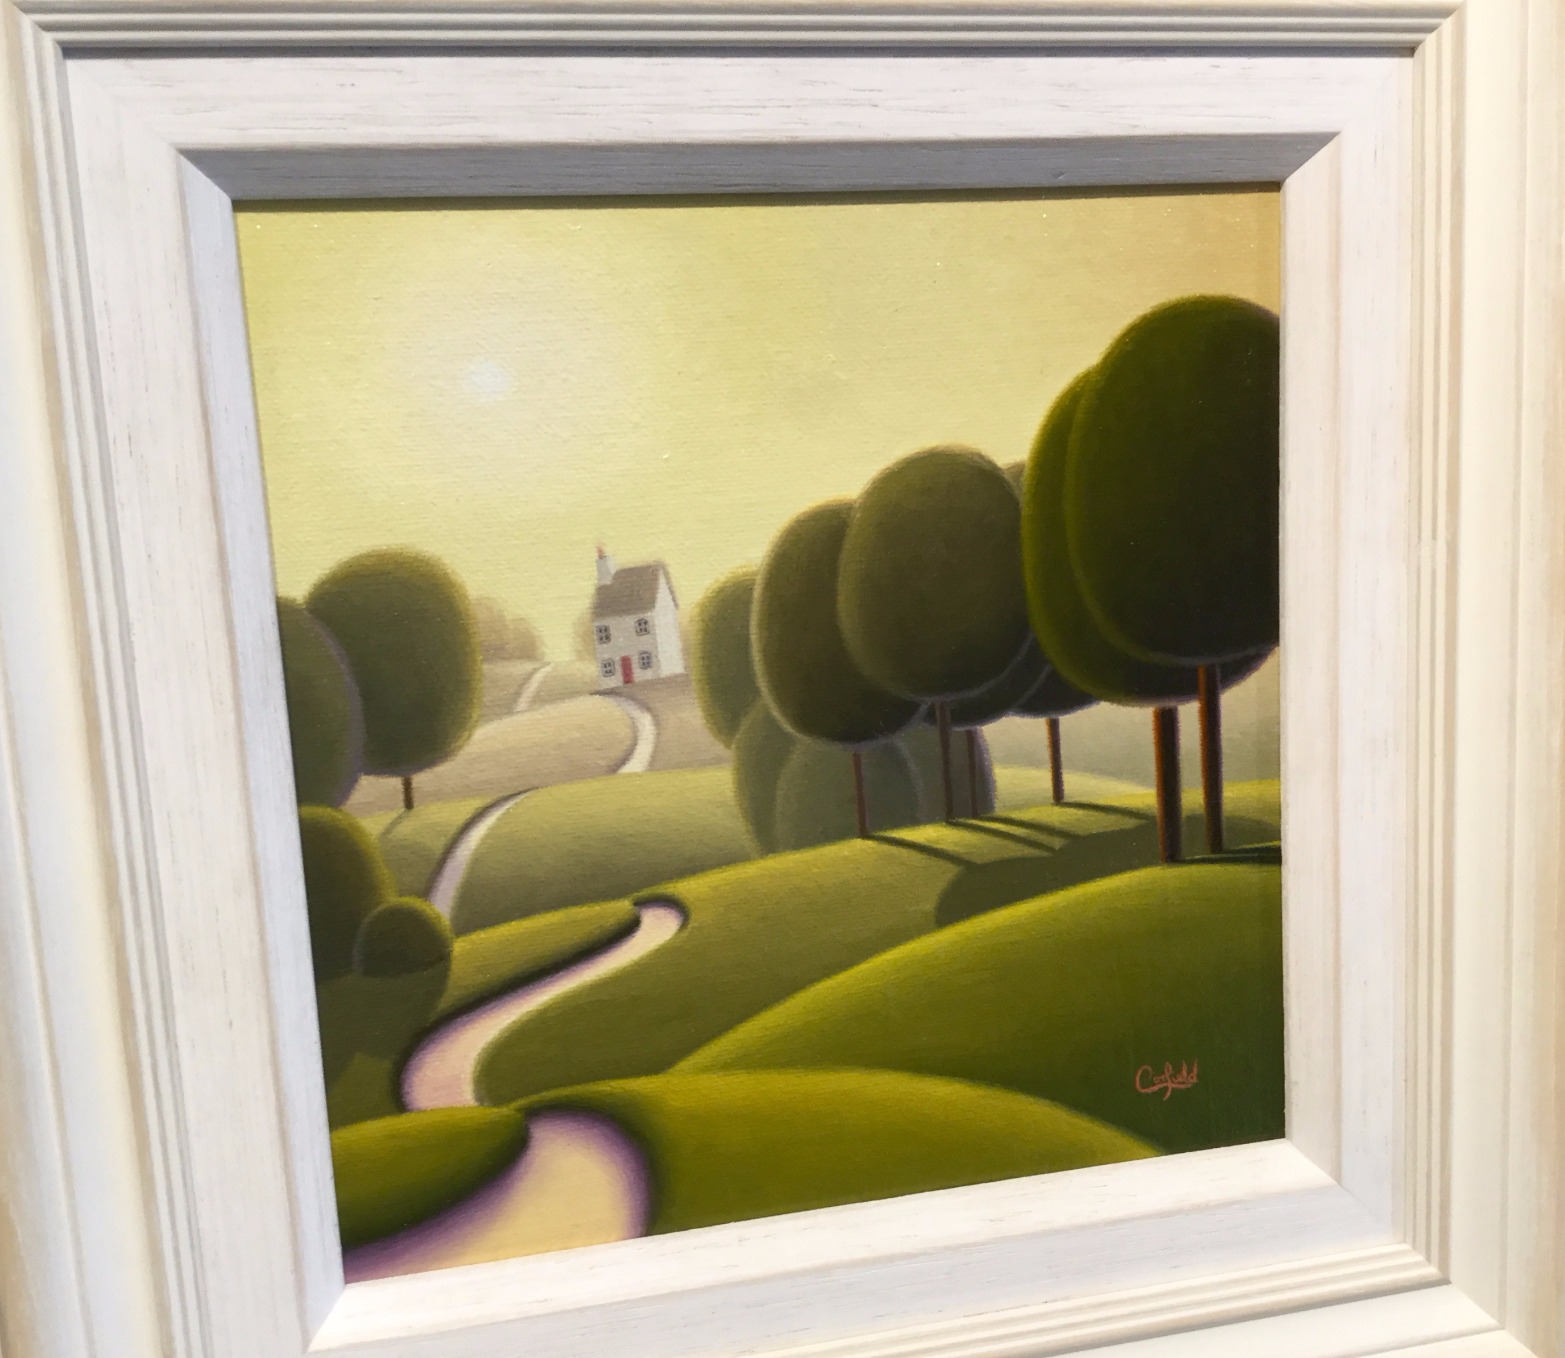 Untitled study 186 by Paul Corfield, Abstract | Landscape | Nostalgic